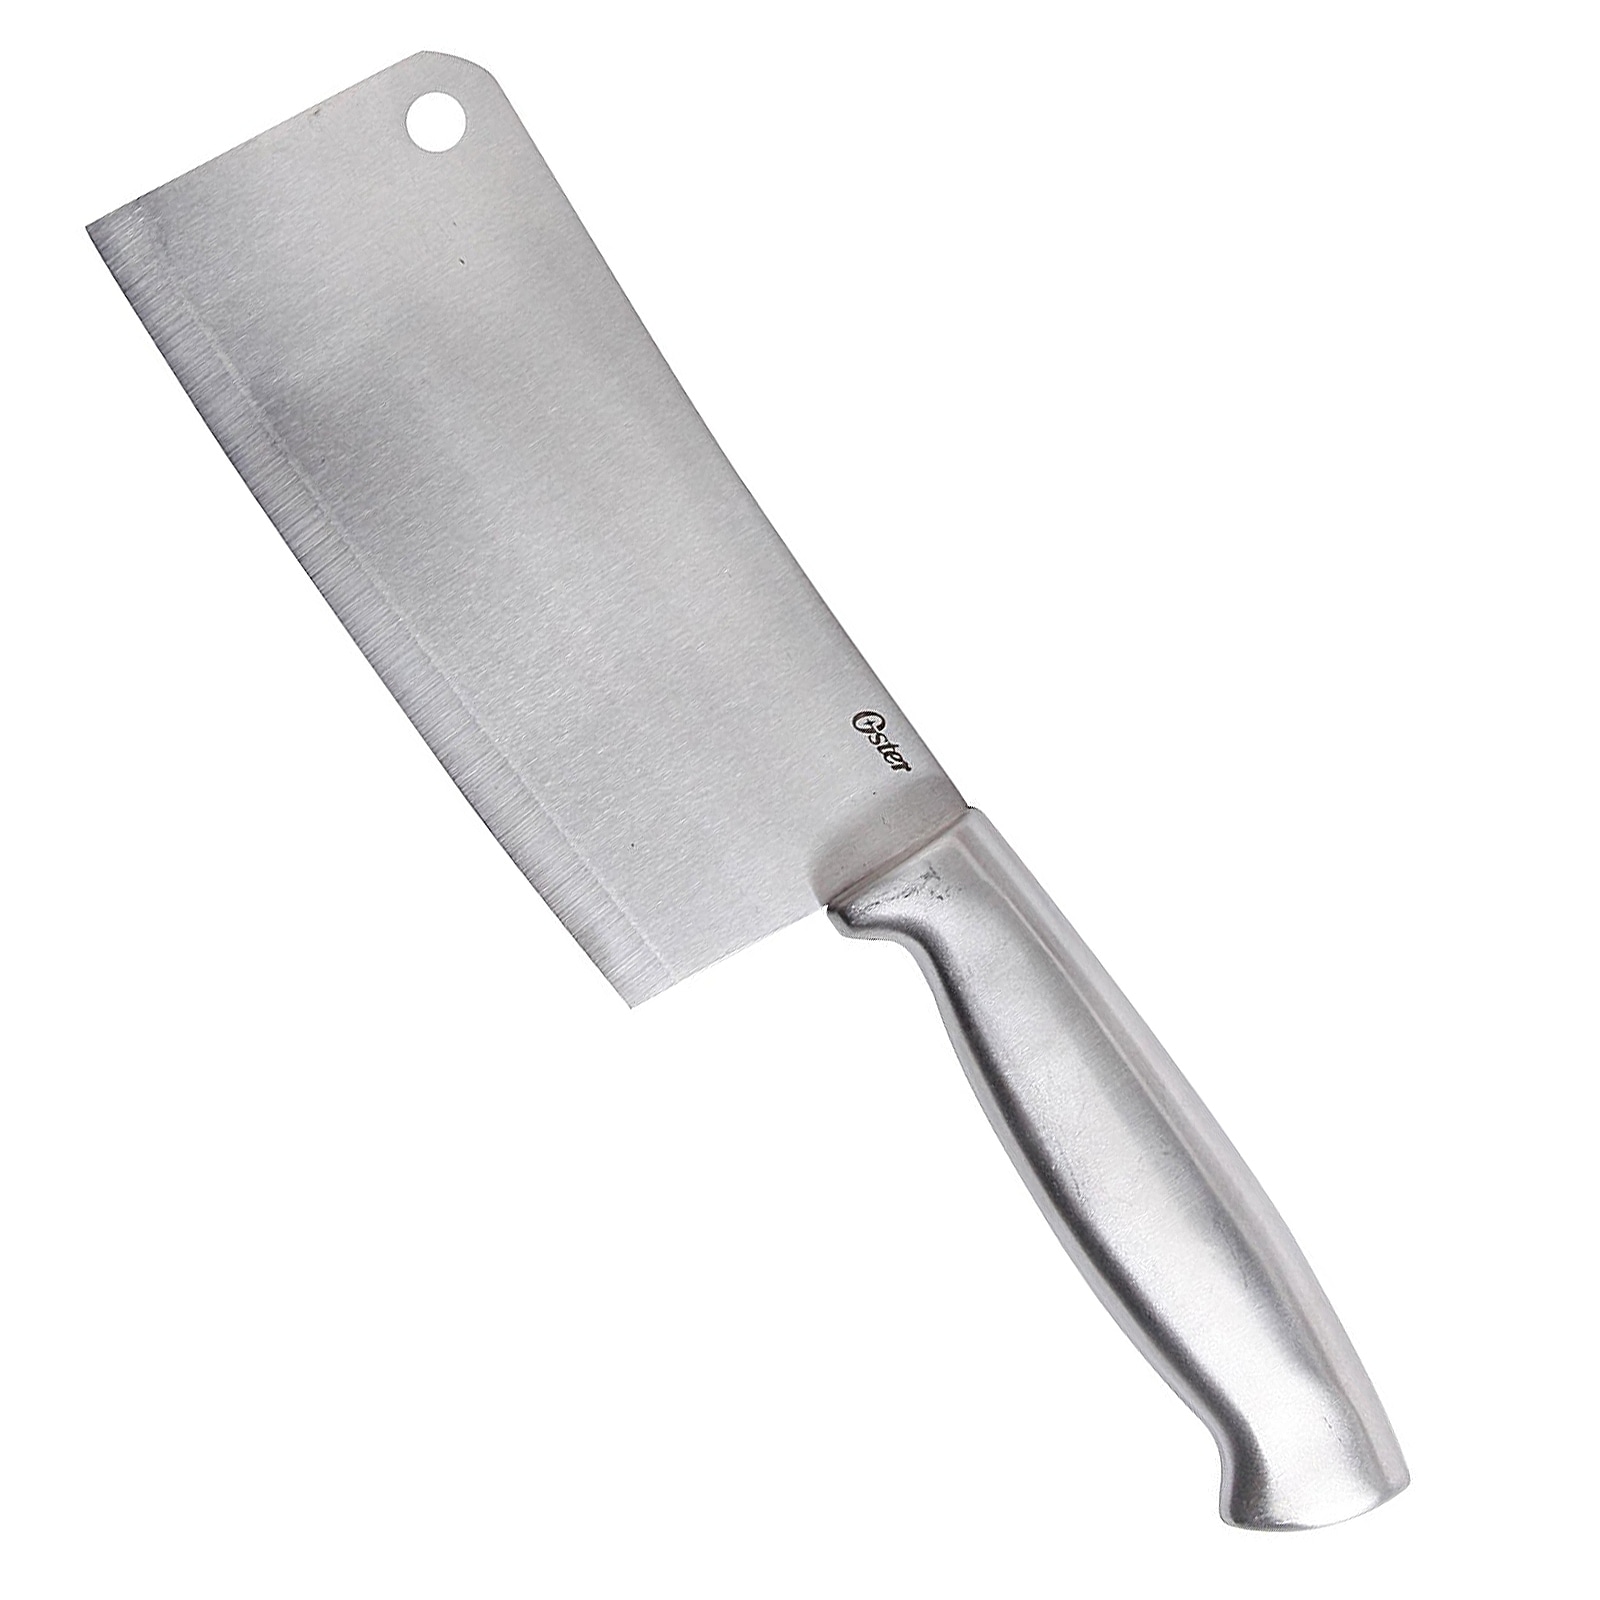 https://ak1.ostkcdn.com/images/products/is/images/direct/b7fd1af7890aff6934f362f4f9e56ce0de3459fa/Oster-Baldwyn-6.25-Inch-Stainless-Steel-Cleaver-Knife.jpg